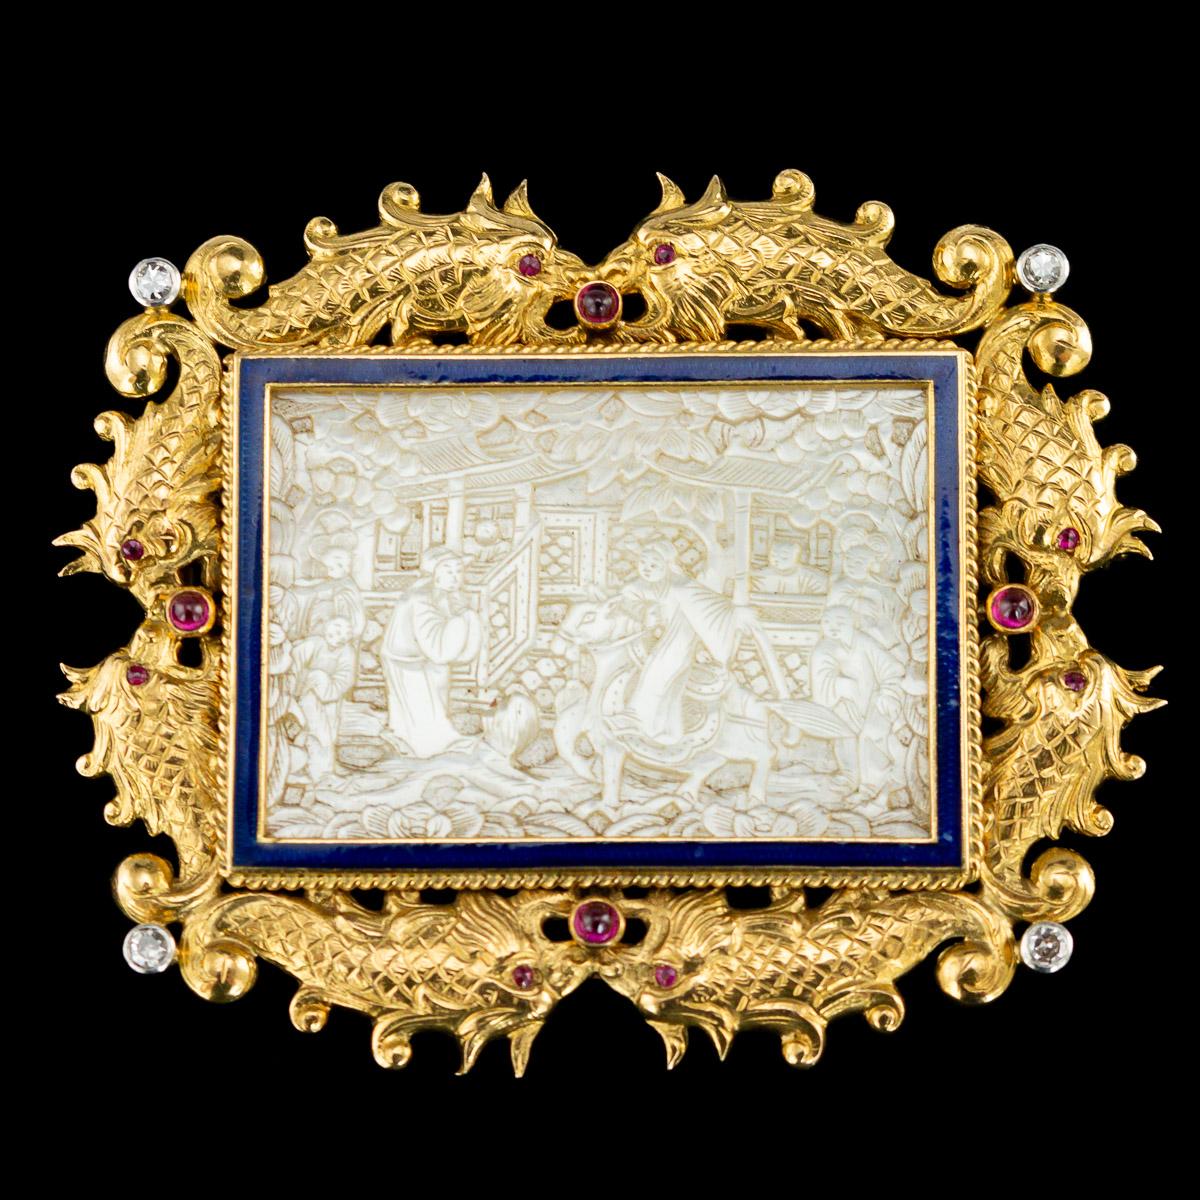 Antique late 19th century French chinoiserie gold and guilloche enamel brooch, of shaped rectangular form, the center mounted with a Chinese made, exquisitely carved mother of pearl panel depicting a Chinese aristocrat on horseback being welcomed,